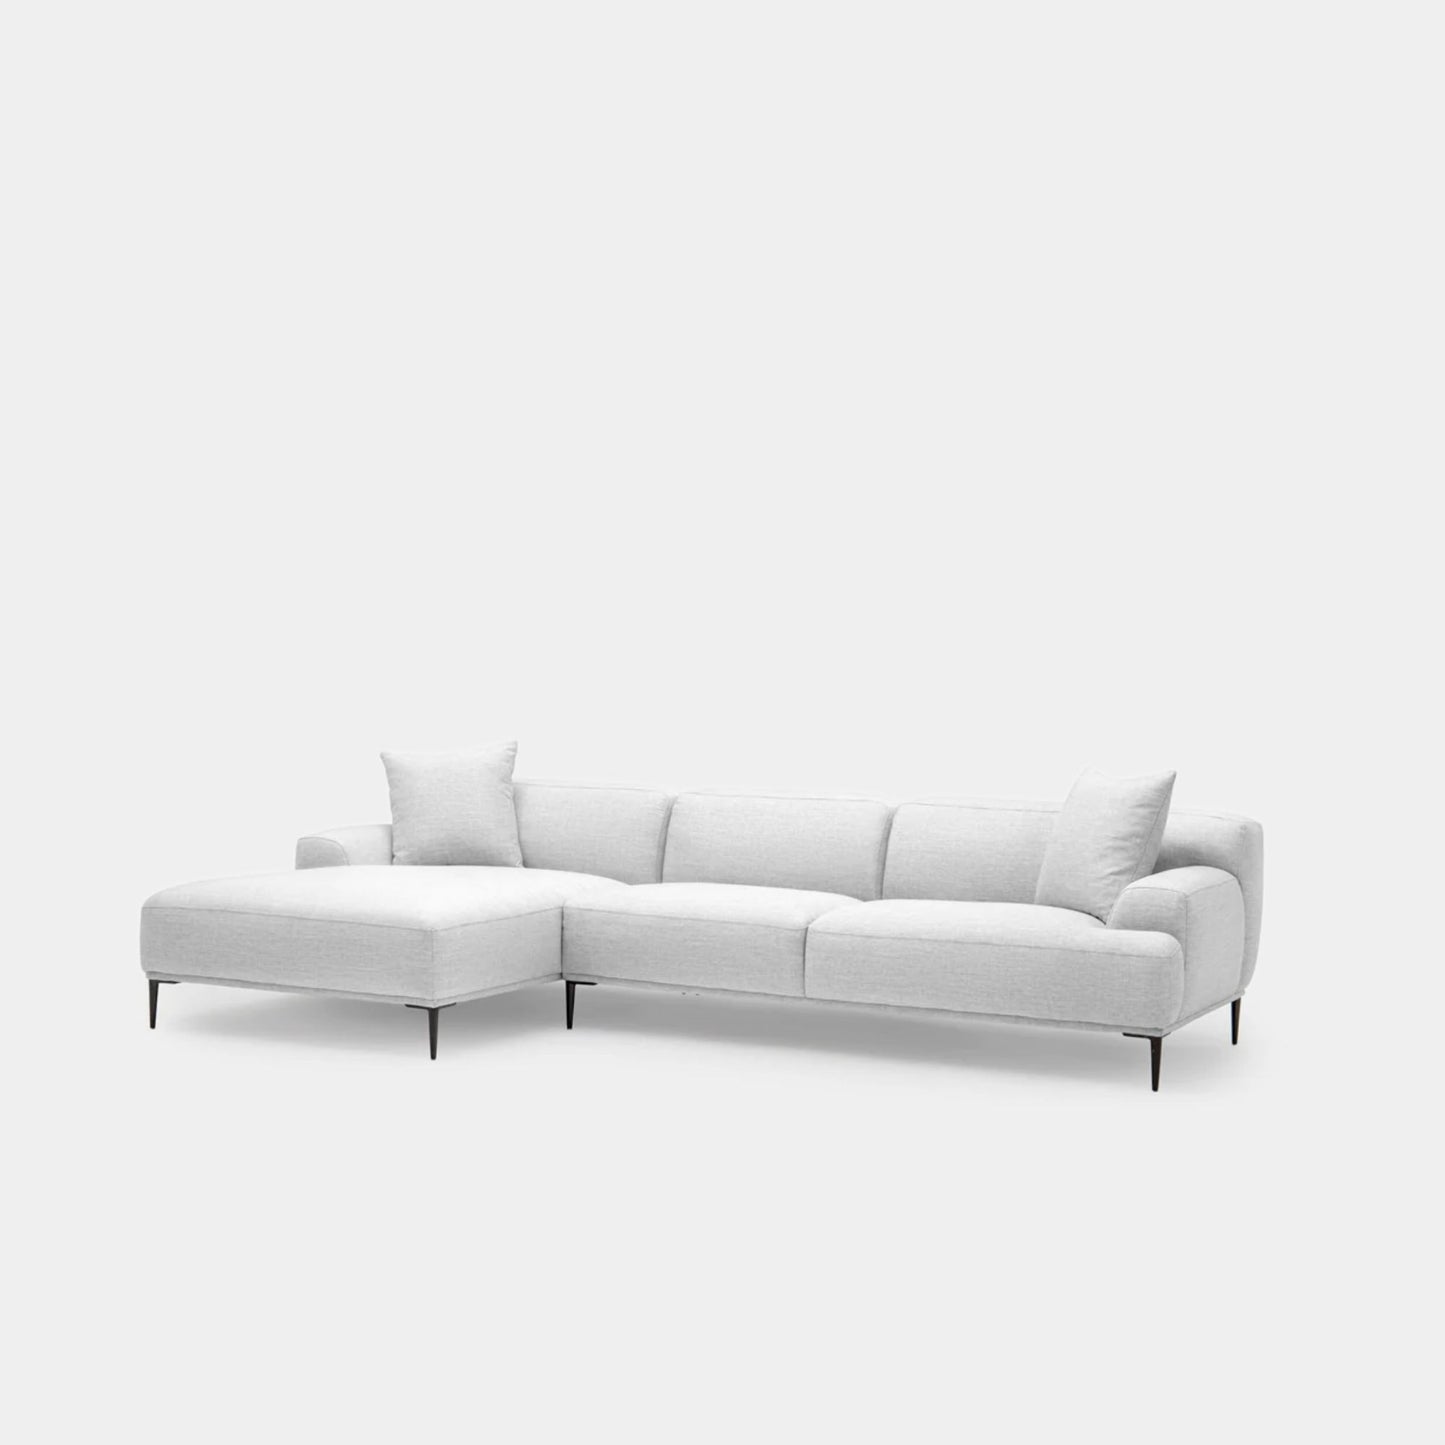 Crystal fabric sectional sofa large left grey